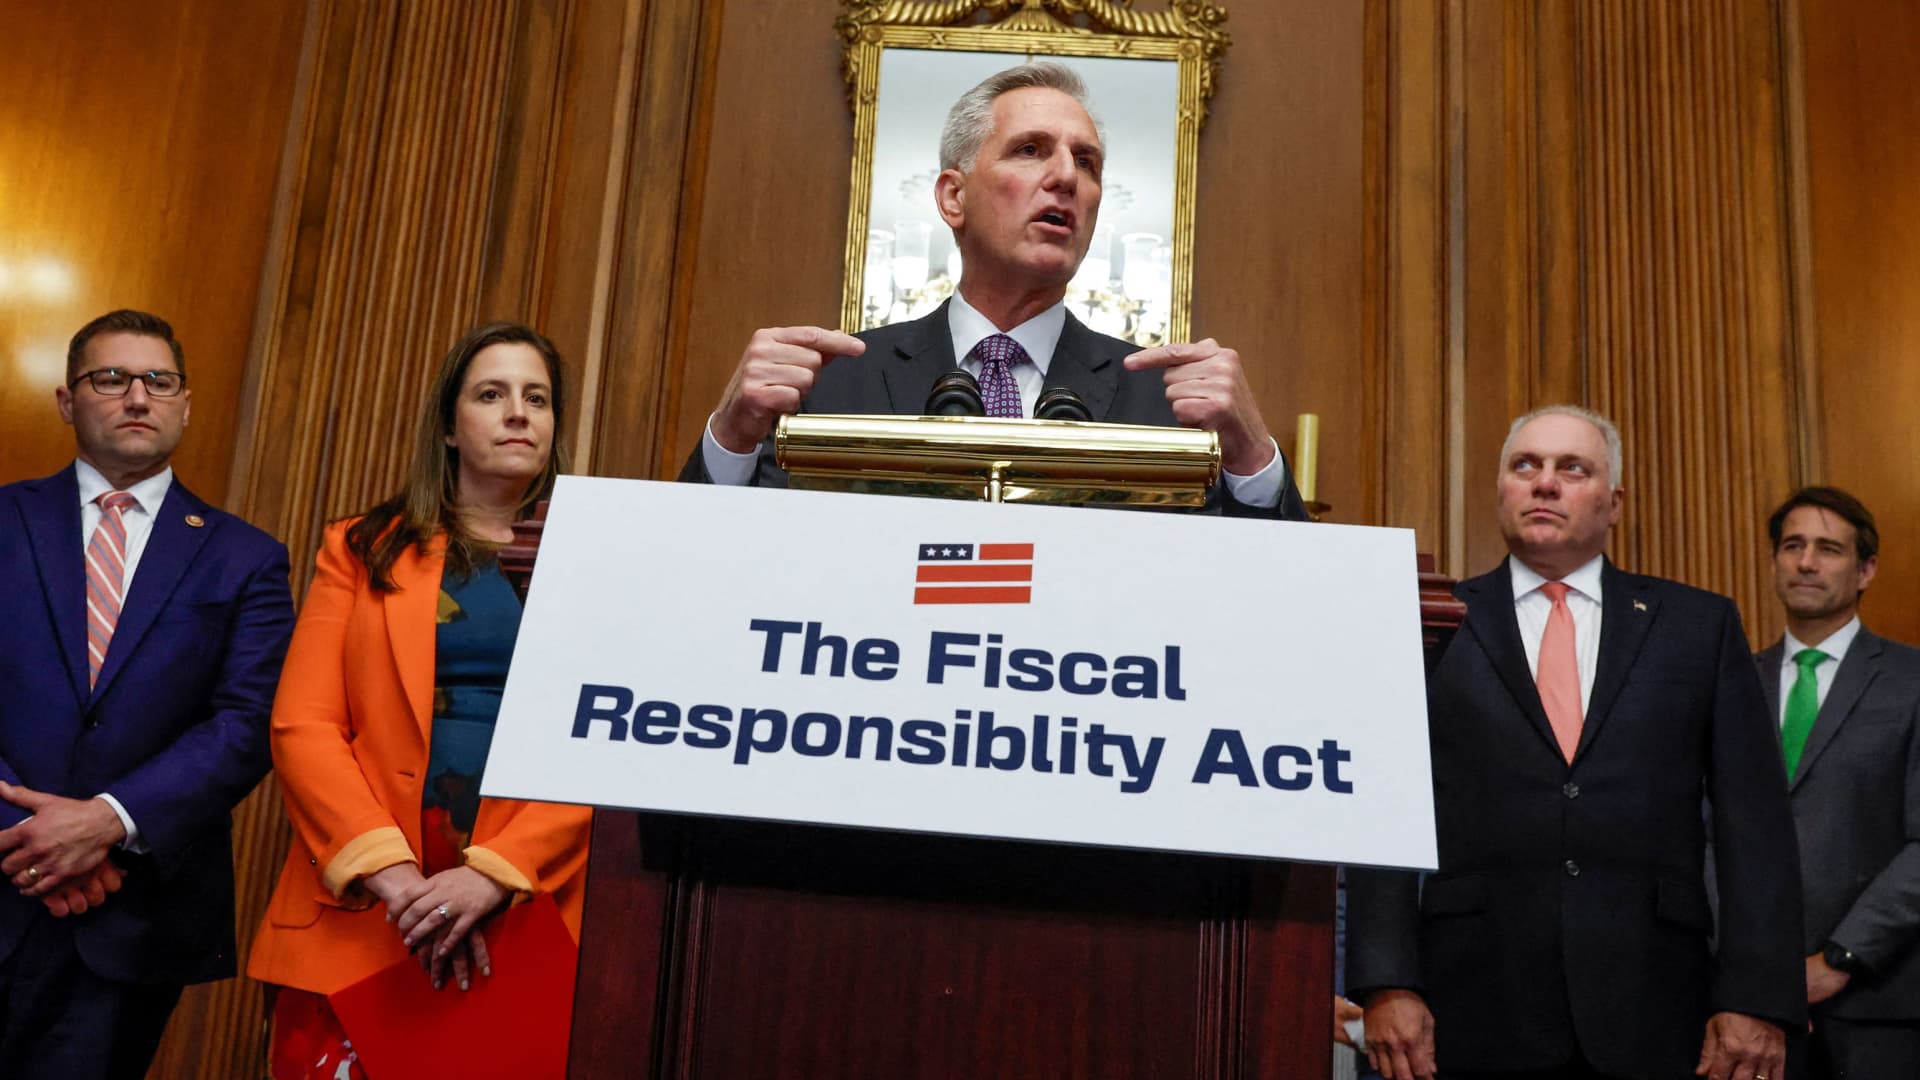 U.S. House Speaker Kevin McCarthy (R-CA) speaks during a press conference accompanied by House Majority Leader Steve Scalise (R-LA) and U.S. Rep. Elise Stefanik (R-NY) after the House approved the debt ceiling deal he negotiated with the White House to end their standoff and avoid a historic default, at the U.S. Capitol in Washington, U.S. May 31, 2023.